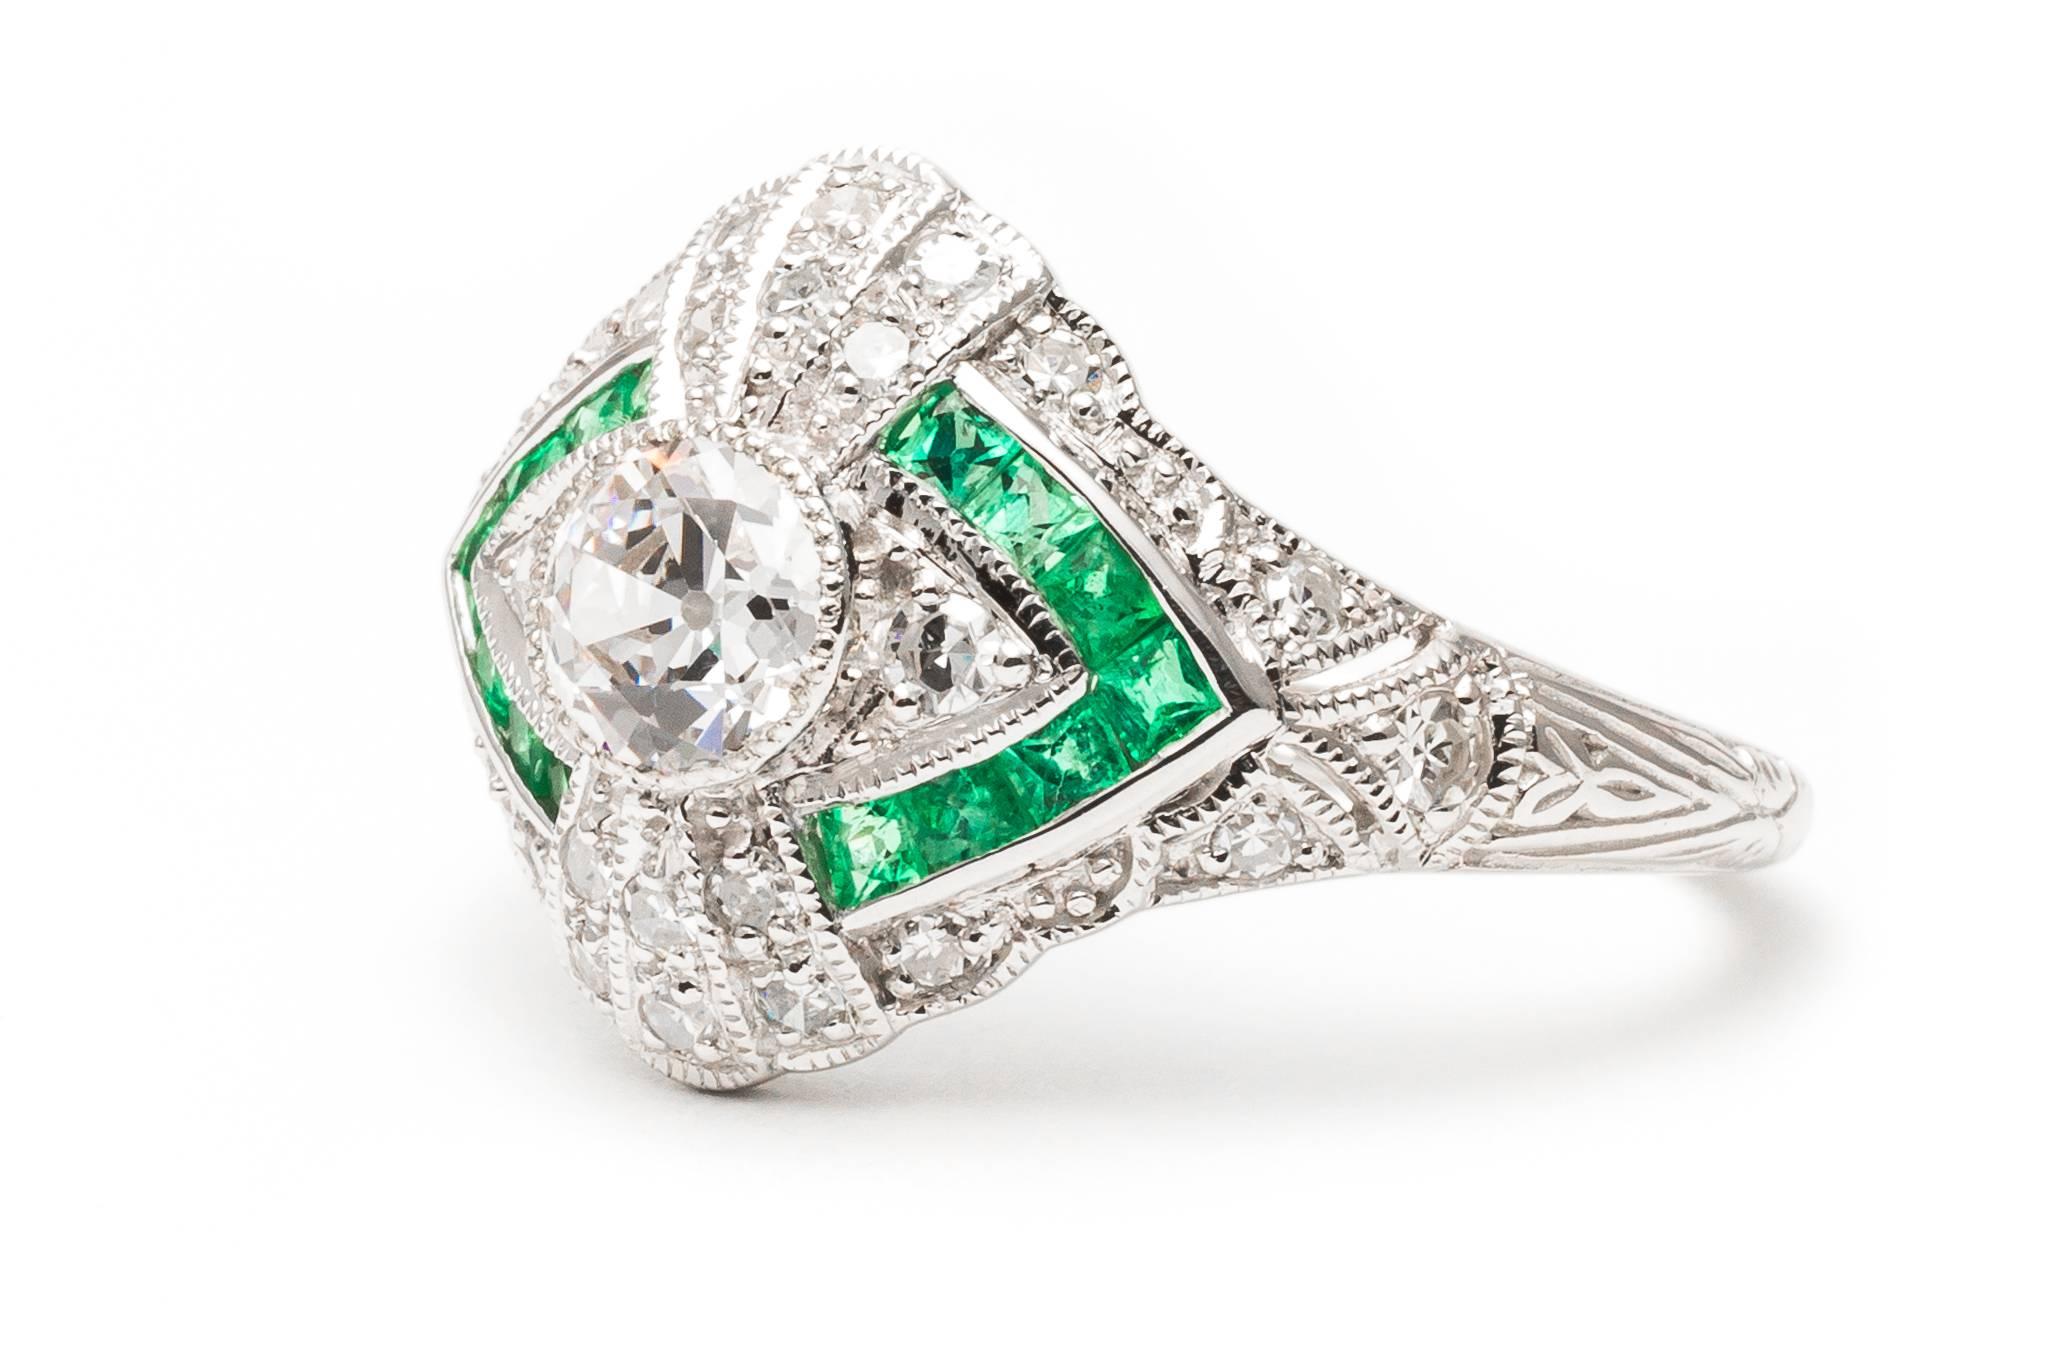 Vibrant French Cut Emerald Diamond White Gold Ring  In Excellent Condition For Sale In Boston, MA